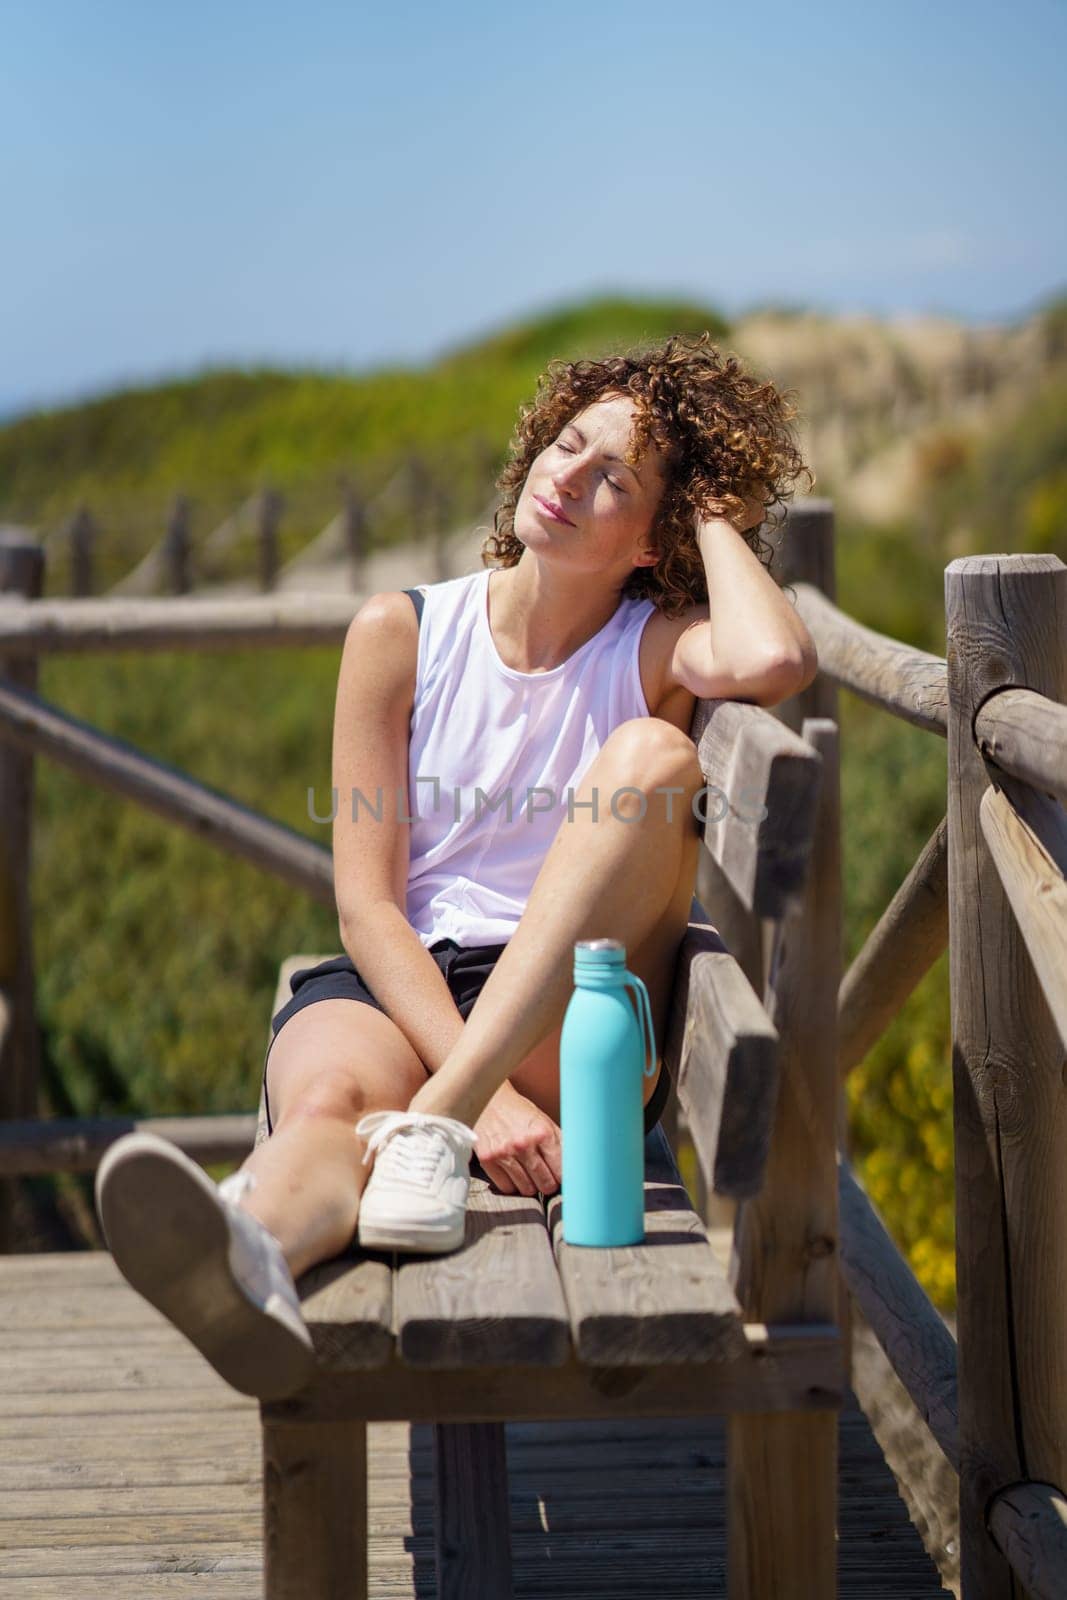 Smiling young female with curly hair eyes closed, relaxing on wooden bench and leaning head on hand while sitting on wooden bench with water bottle on bridge